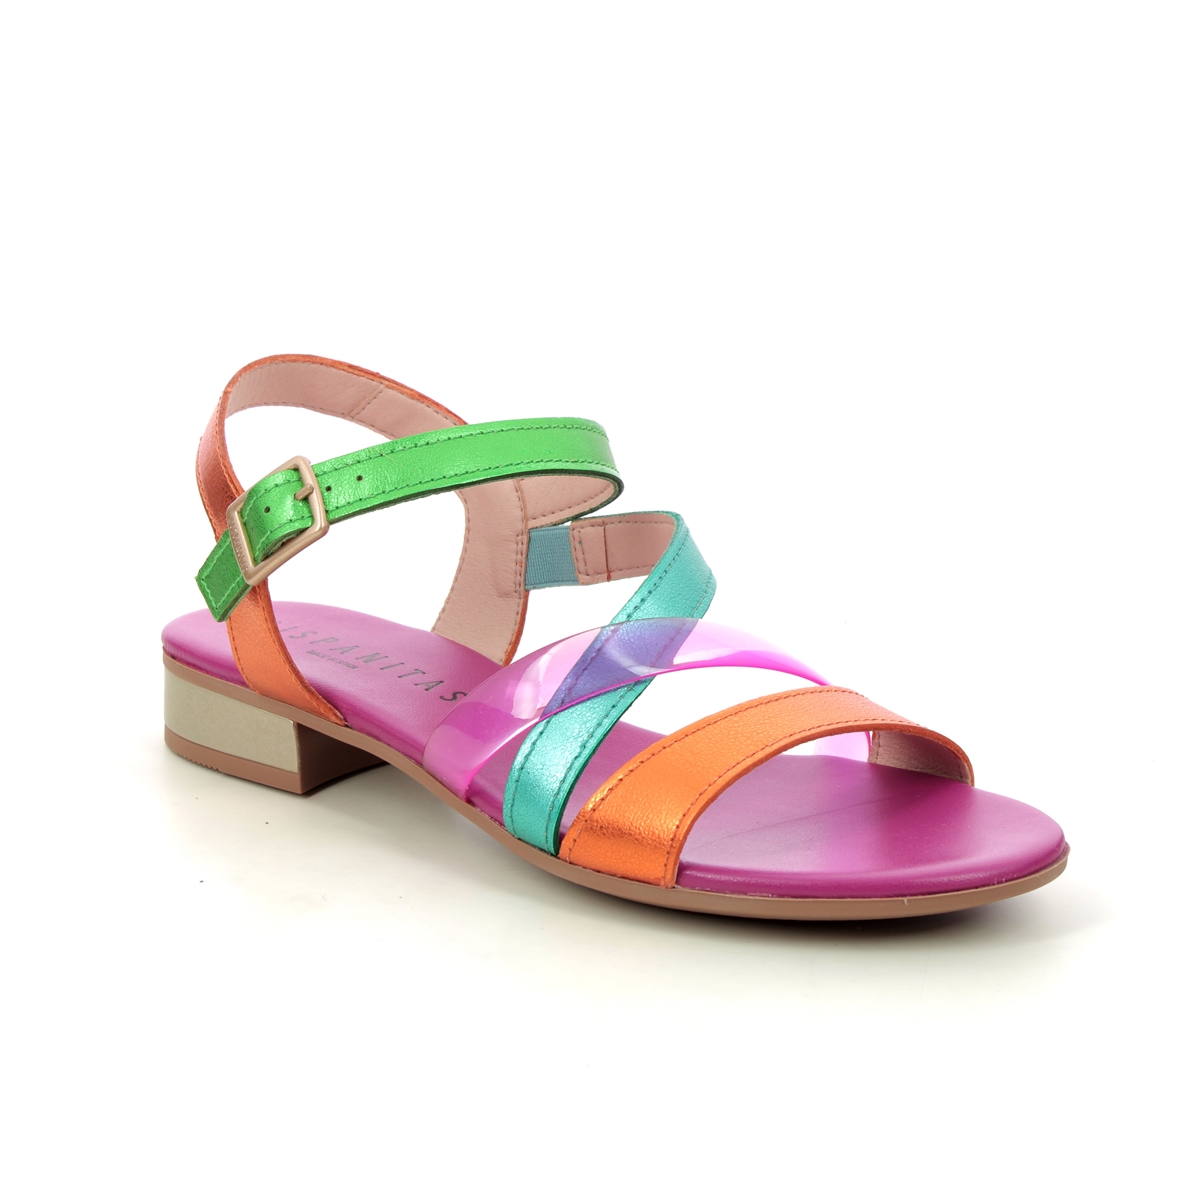 Hispanitas Lena Strappy Multi Coloured Womens Flat Sandals CHV243367-002 in a Plain Leather in Size 40